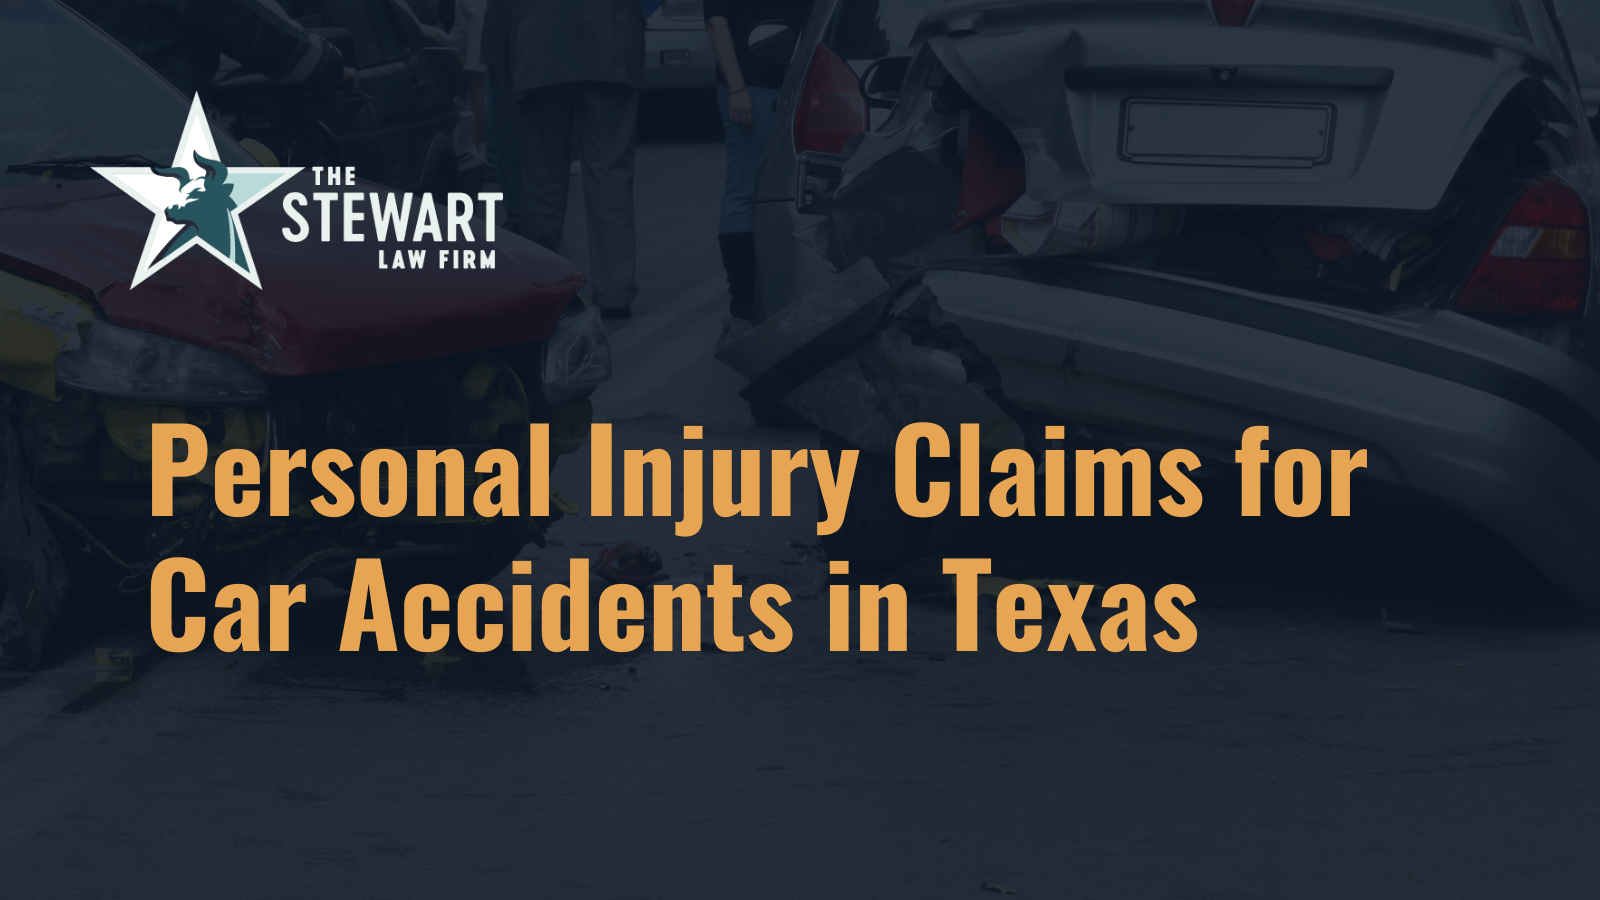 Personal Injury Claims for Car Accidents in Texas - the stephen stewart law firm - austin texas personal injury lawyer